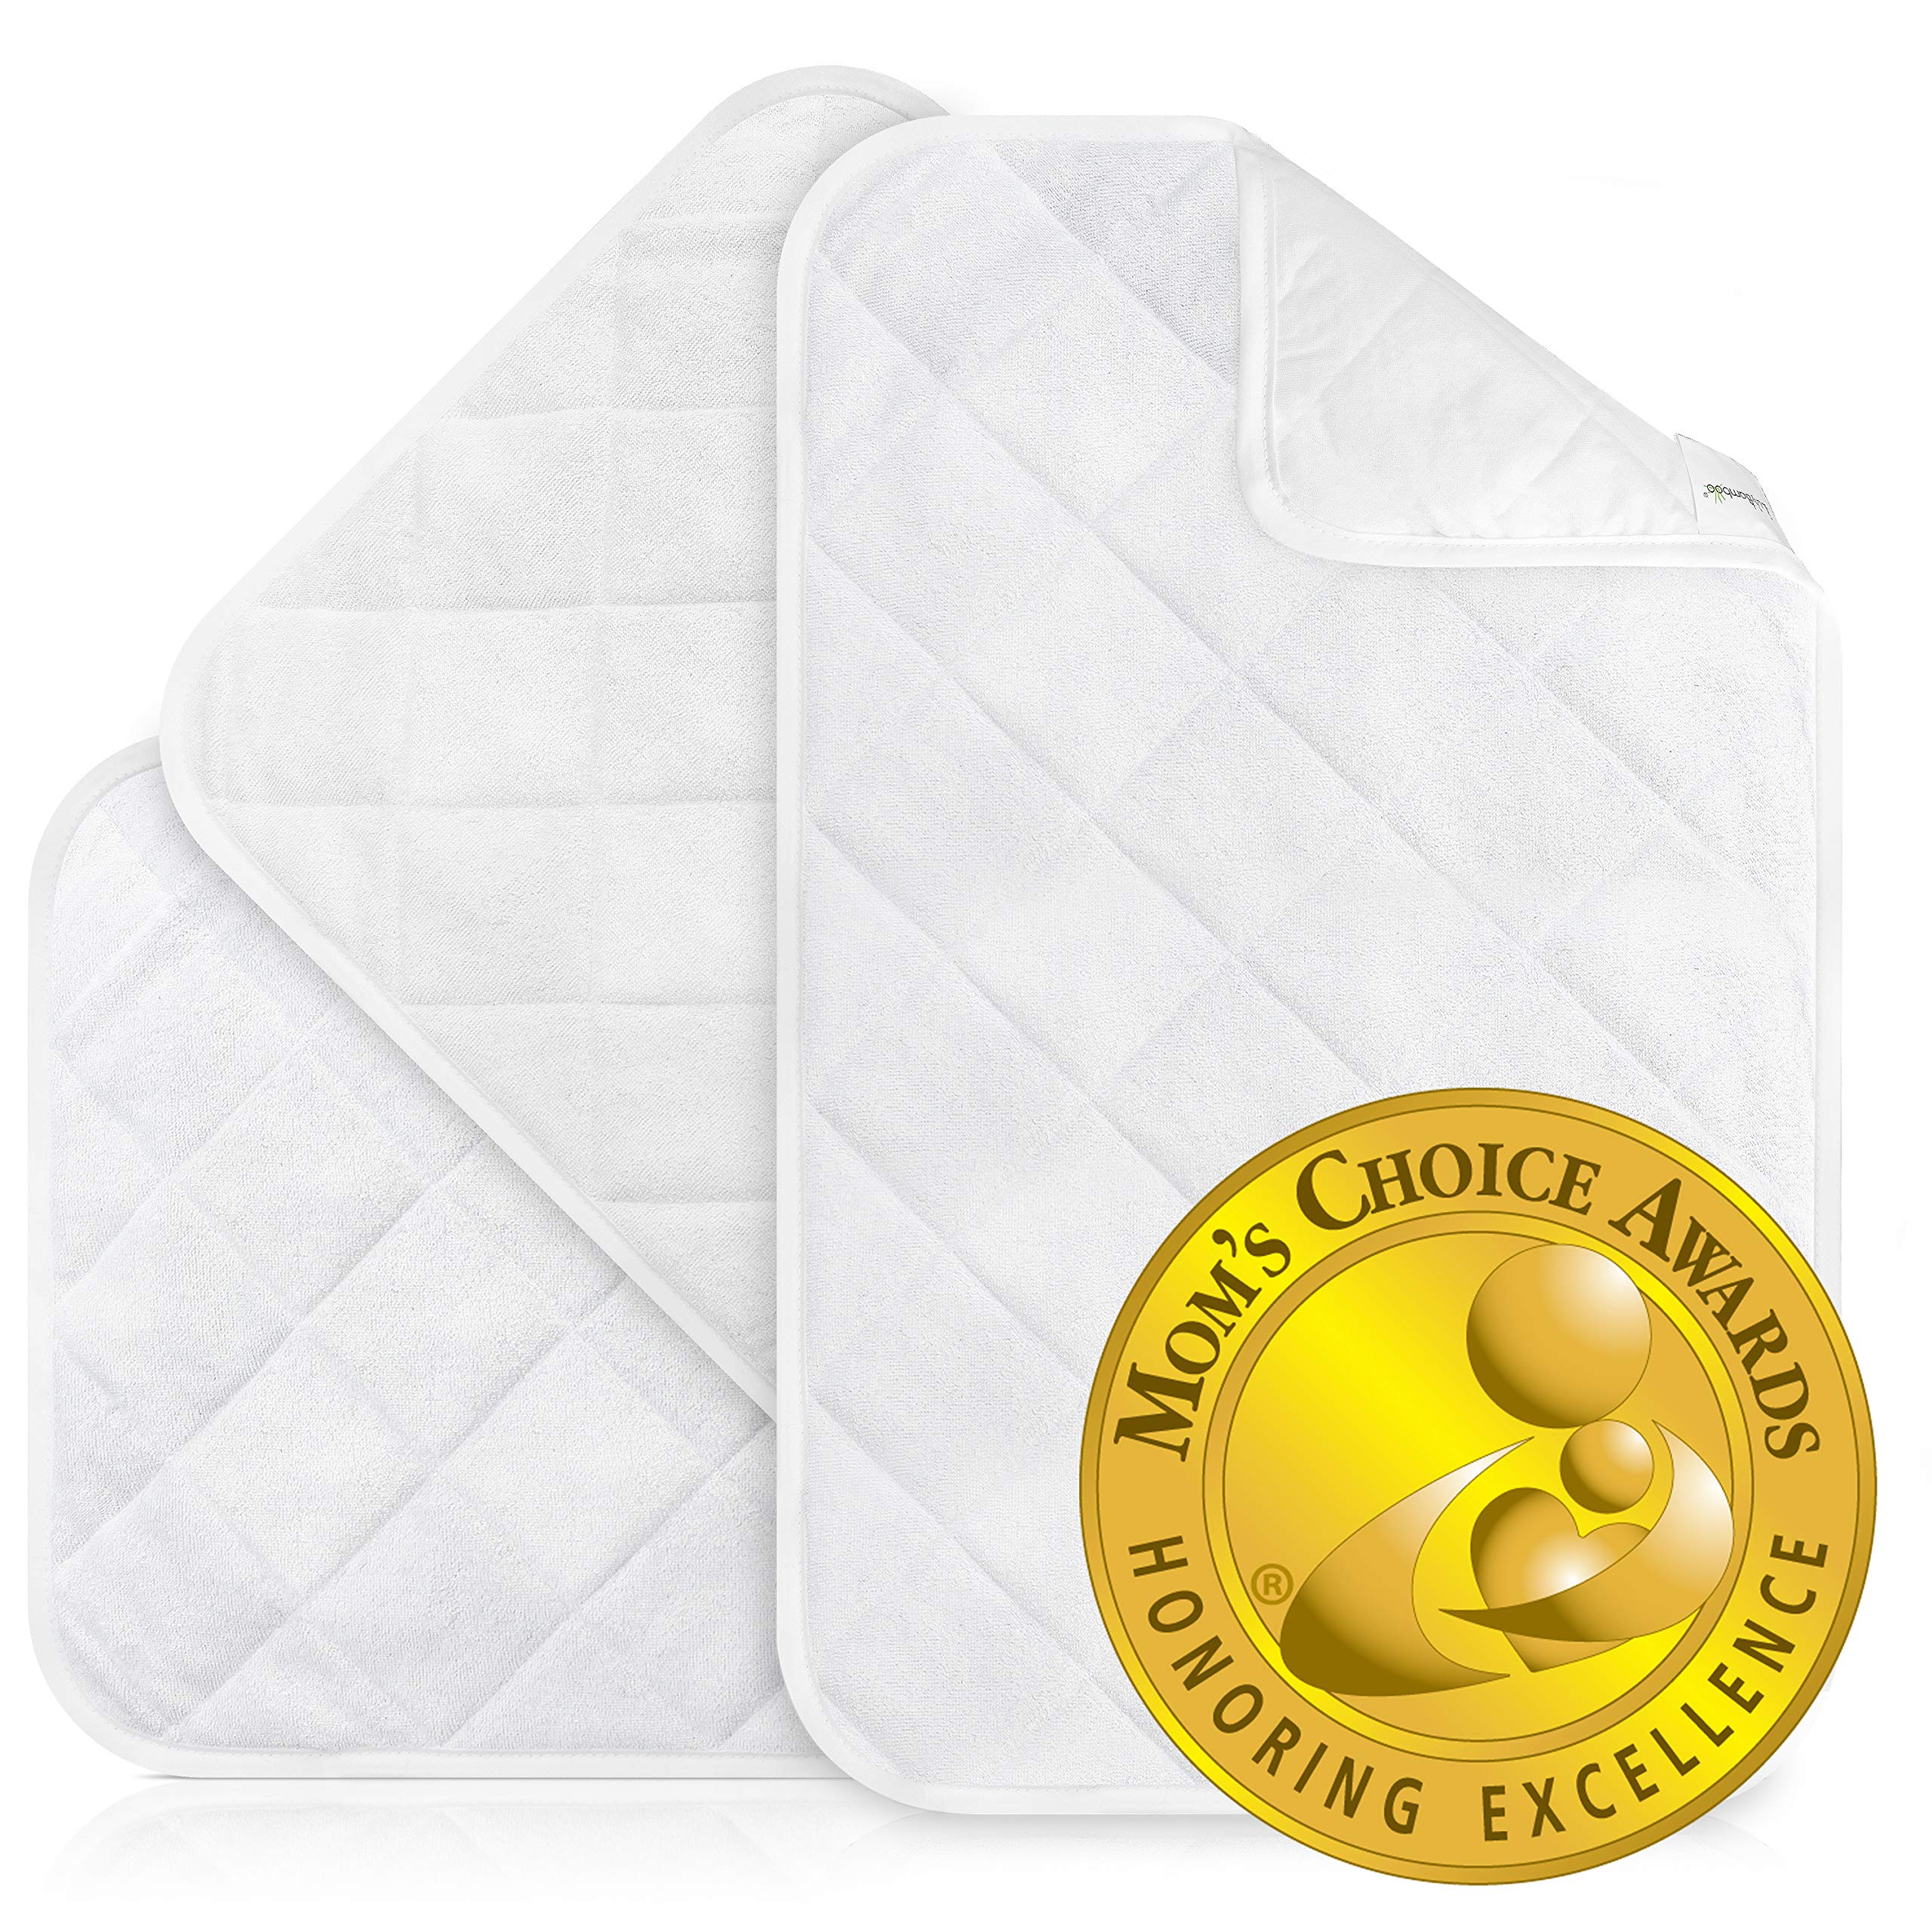 Book Cover CHANGING PAD LINERS BEST for Baby Diaper Changing Table, Extra Soft Bamboo, White Waterproof Liner Cover Mat, Portable & Durable Travel Pads, Pack of 3, Baby Shower Gift Ideas